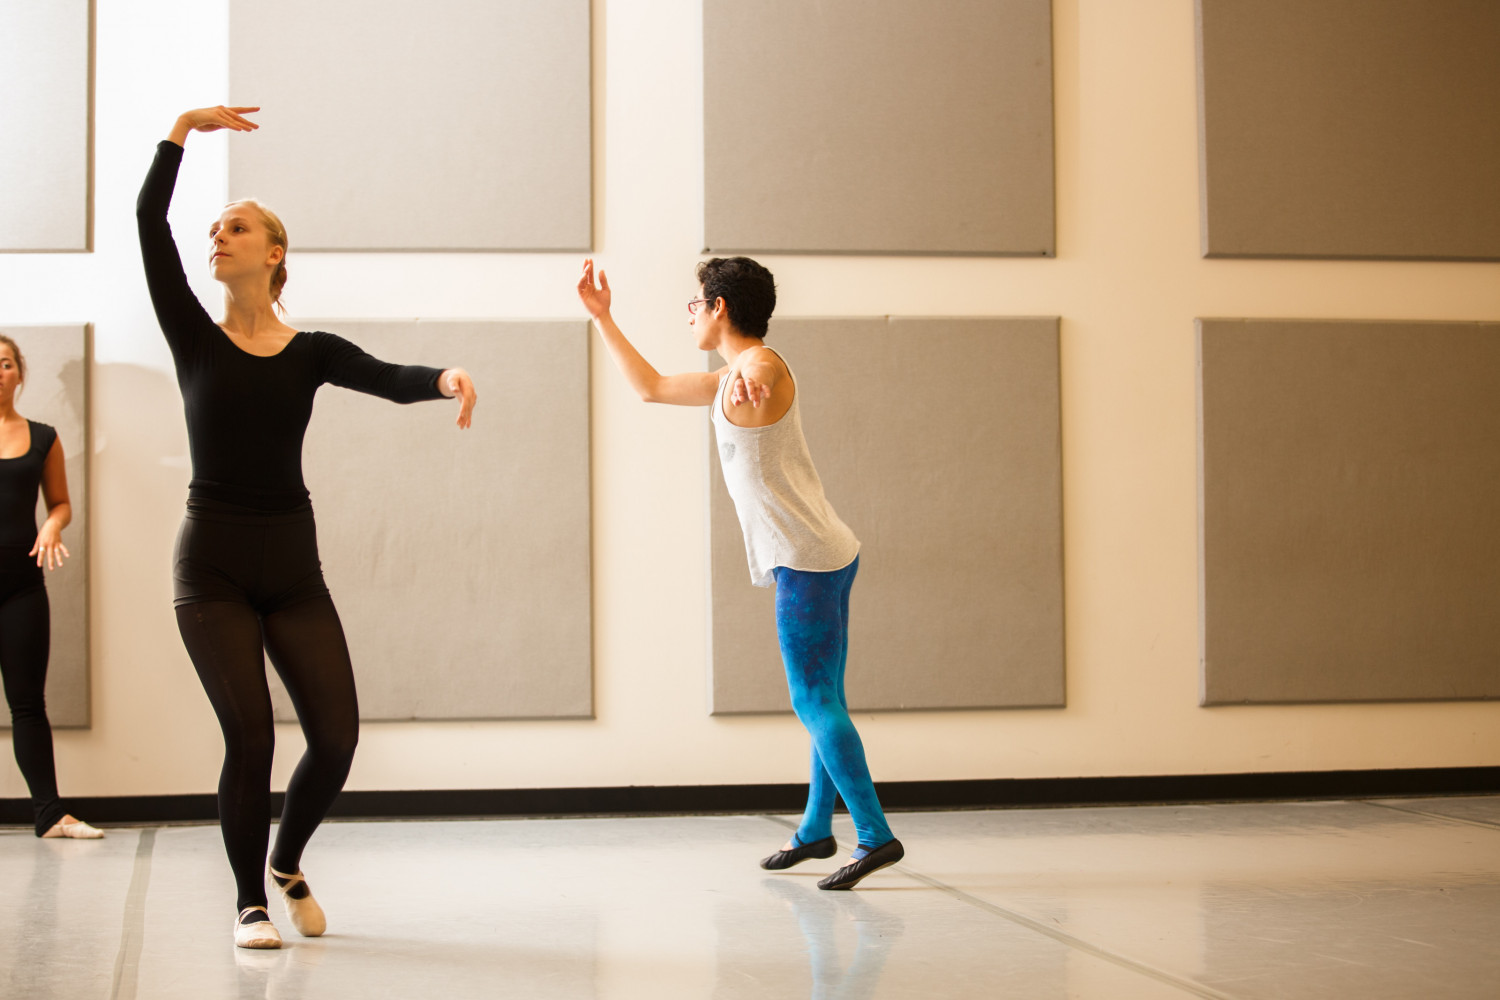 Students performing in the Dance Studio.